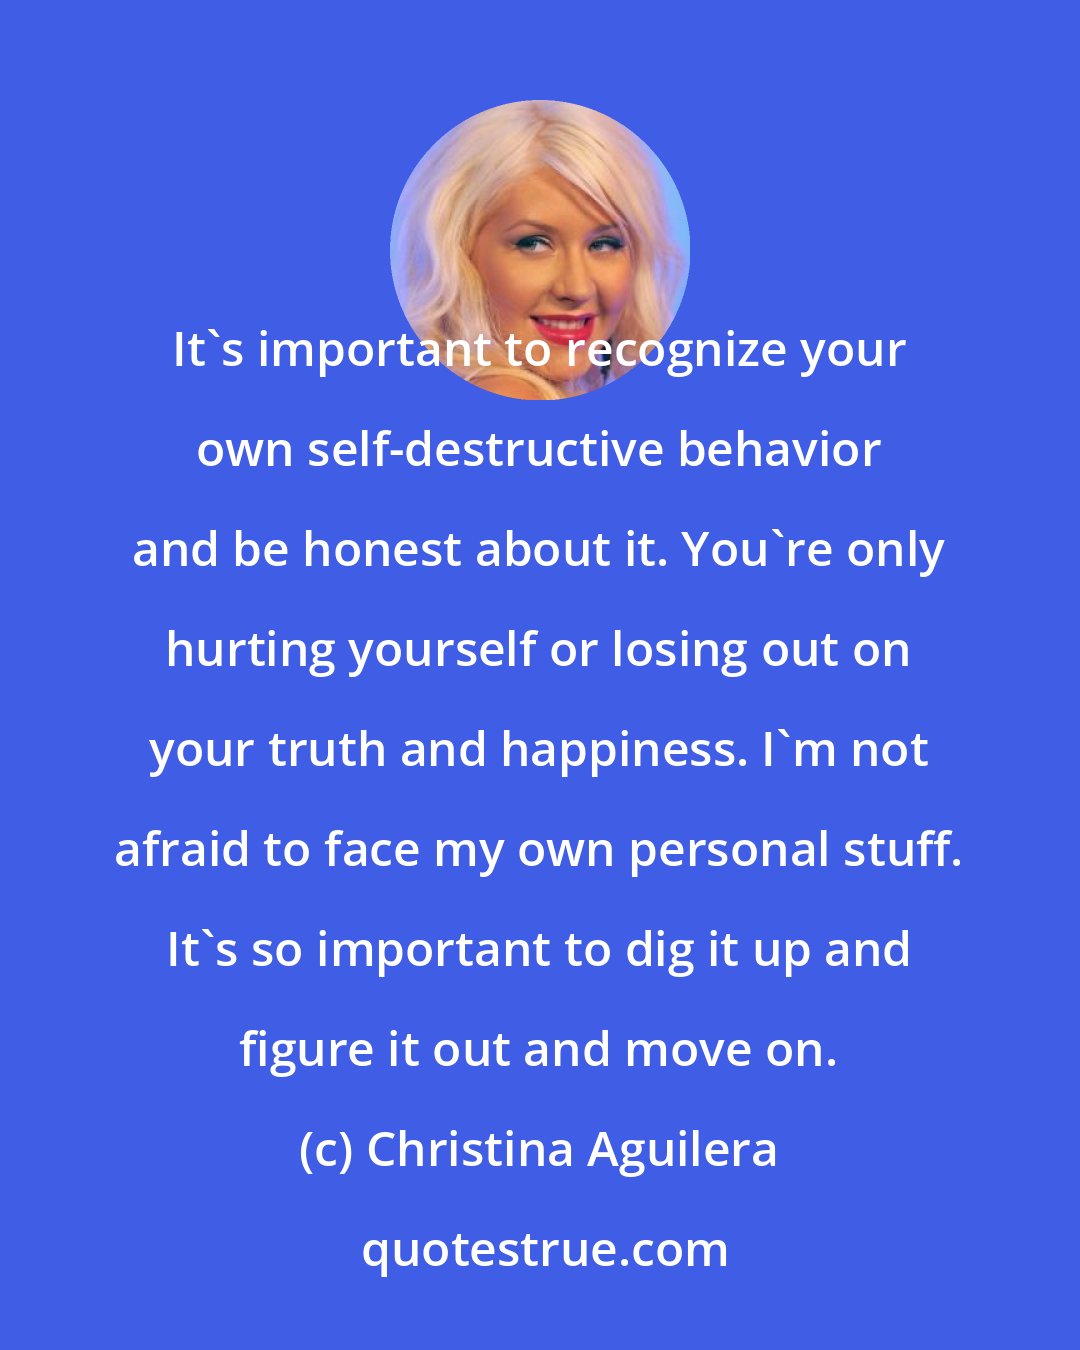 Christina Aguilera: It's important to recognize your own self-destructive behavior and be honest about it. You're only hurting yourself or losing out on your truth and happiness. I'm not afraid to face my own personal stuff. It's so important to dig it up and figure it out and move on.